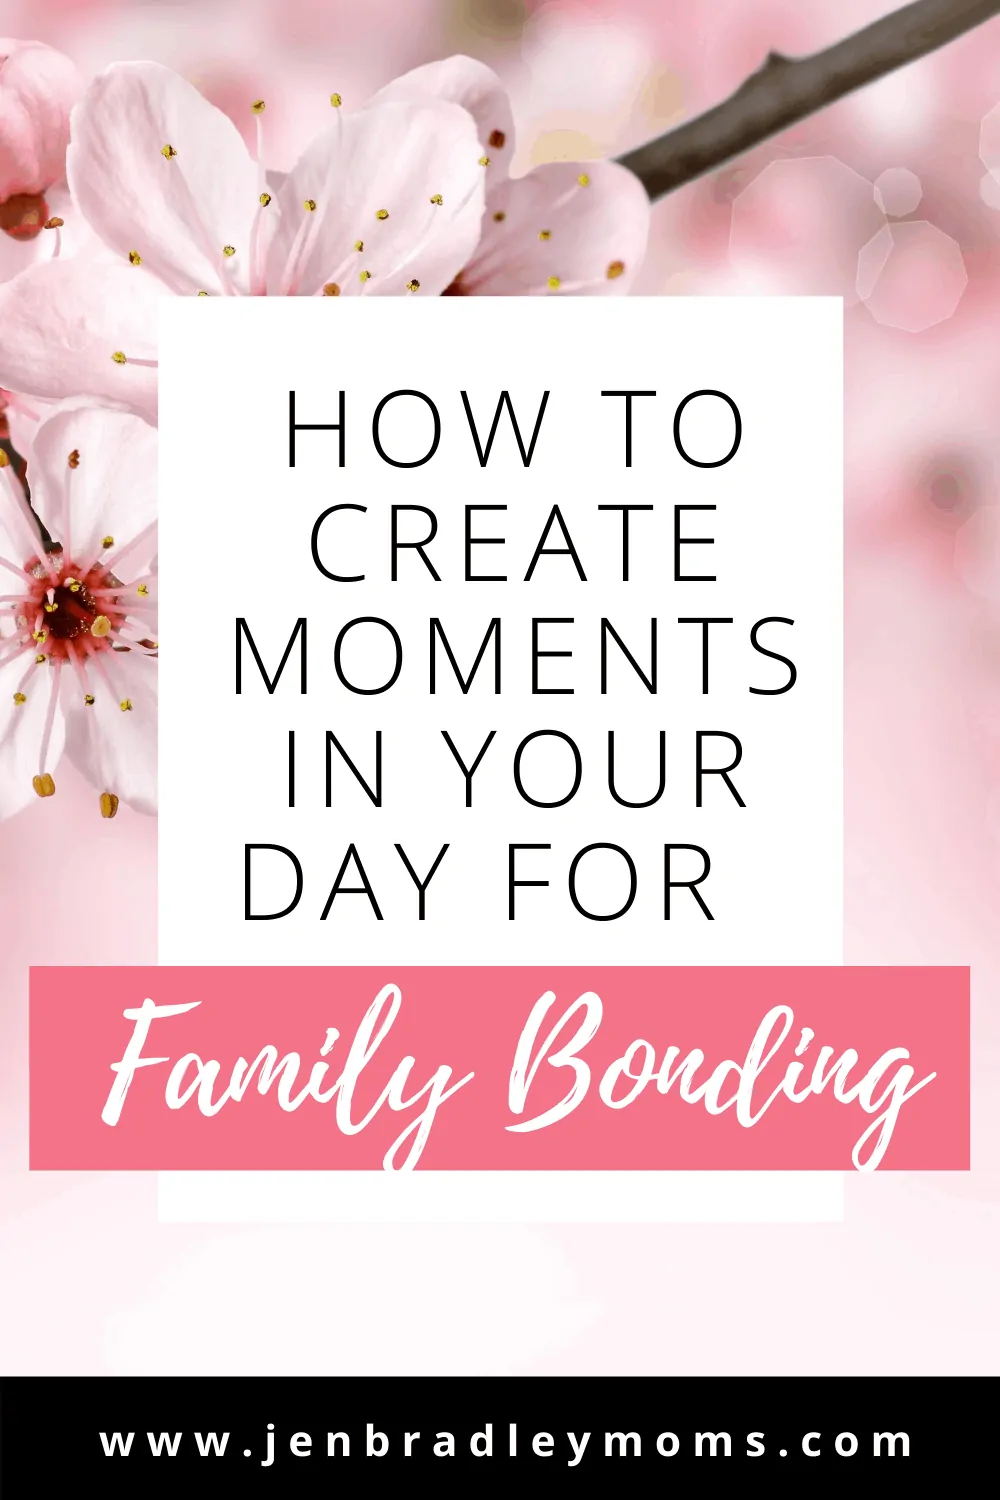 How to Create Opportunities for Family Bonding Activities